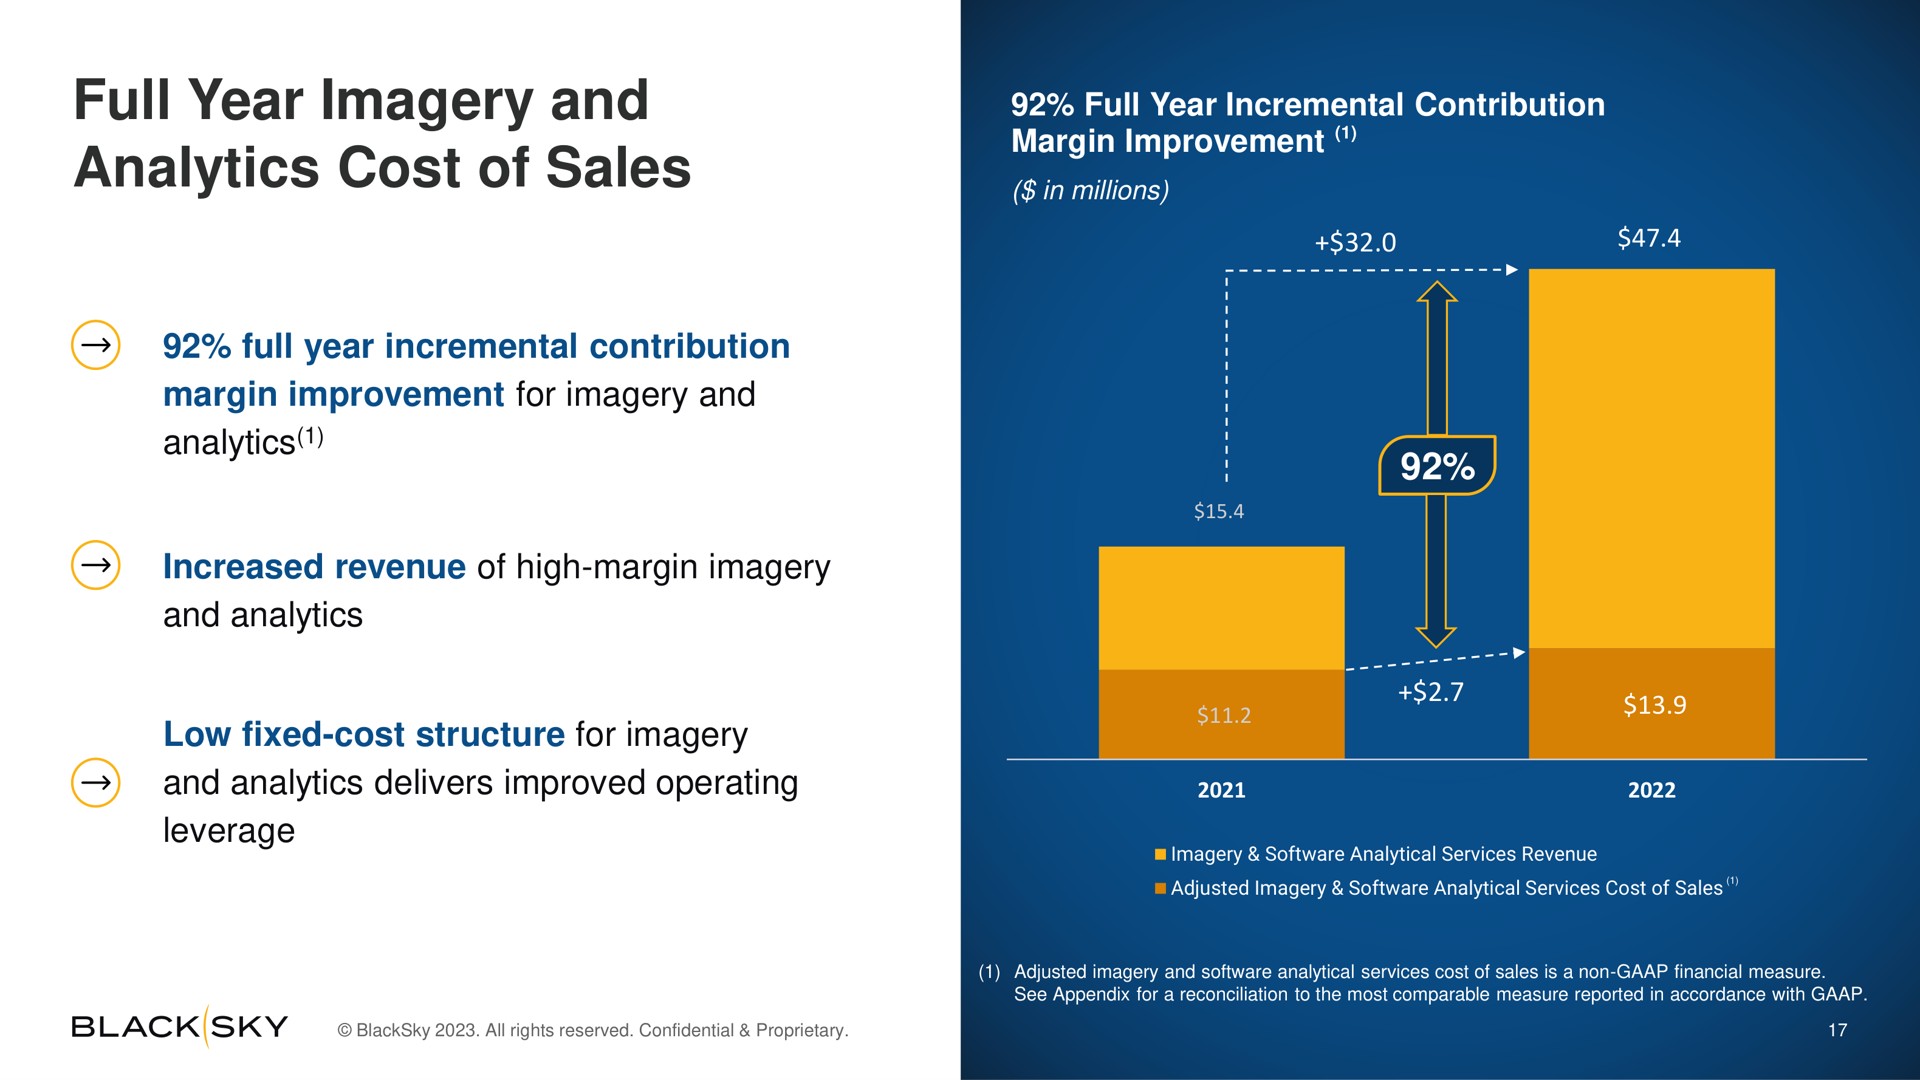 full year imagery and analytics cost of sales | BlackSky